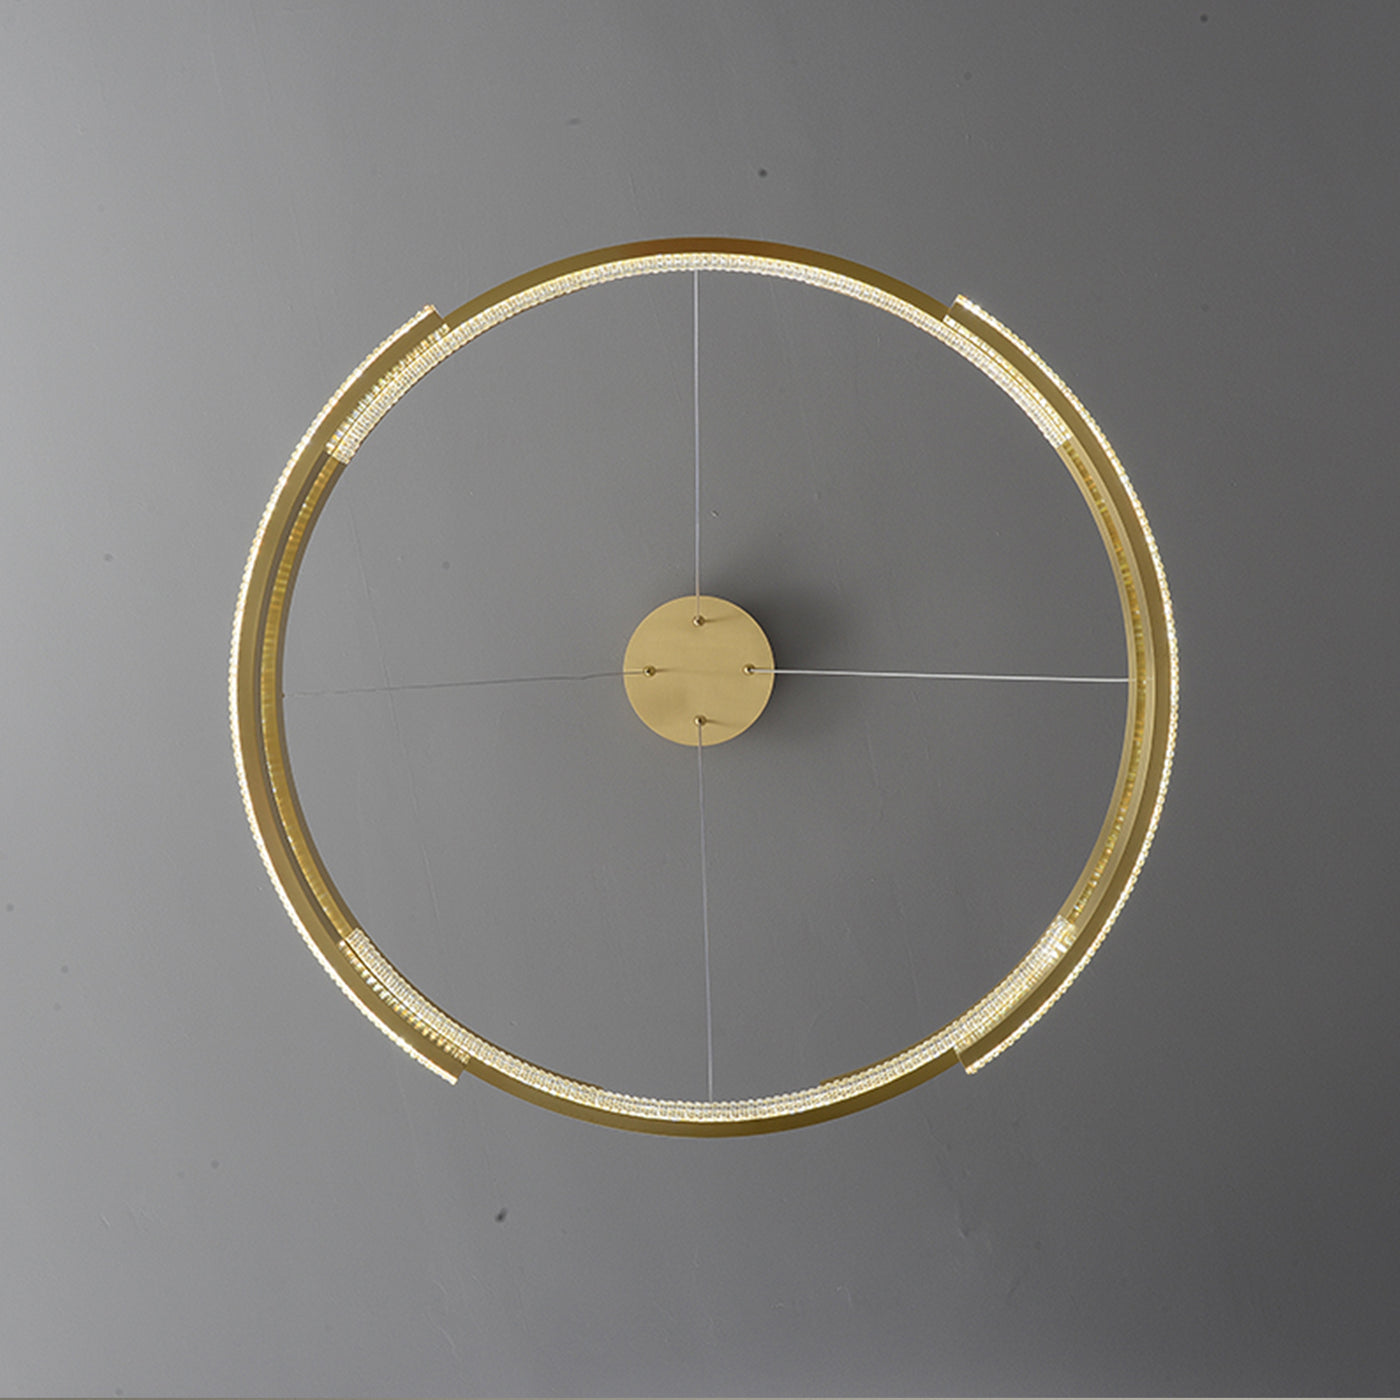 Creative simple ring chandelier